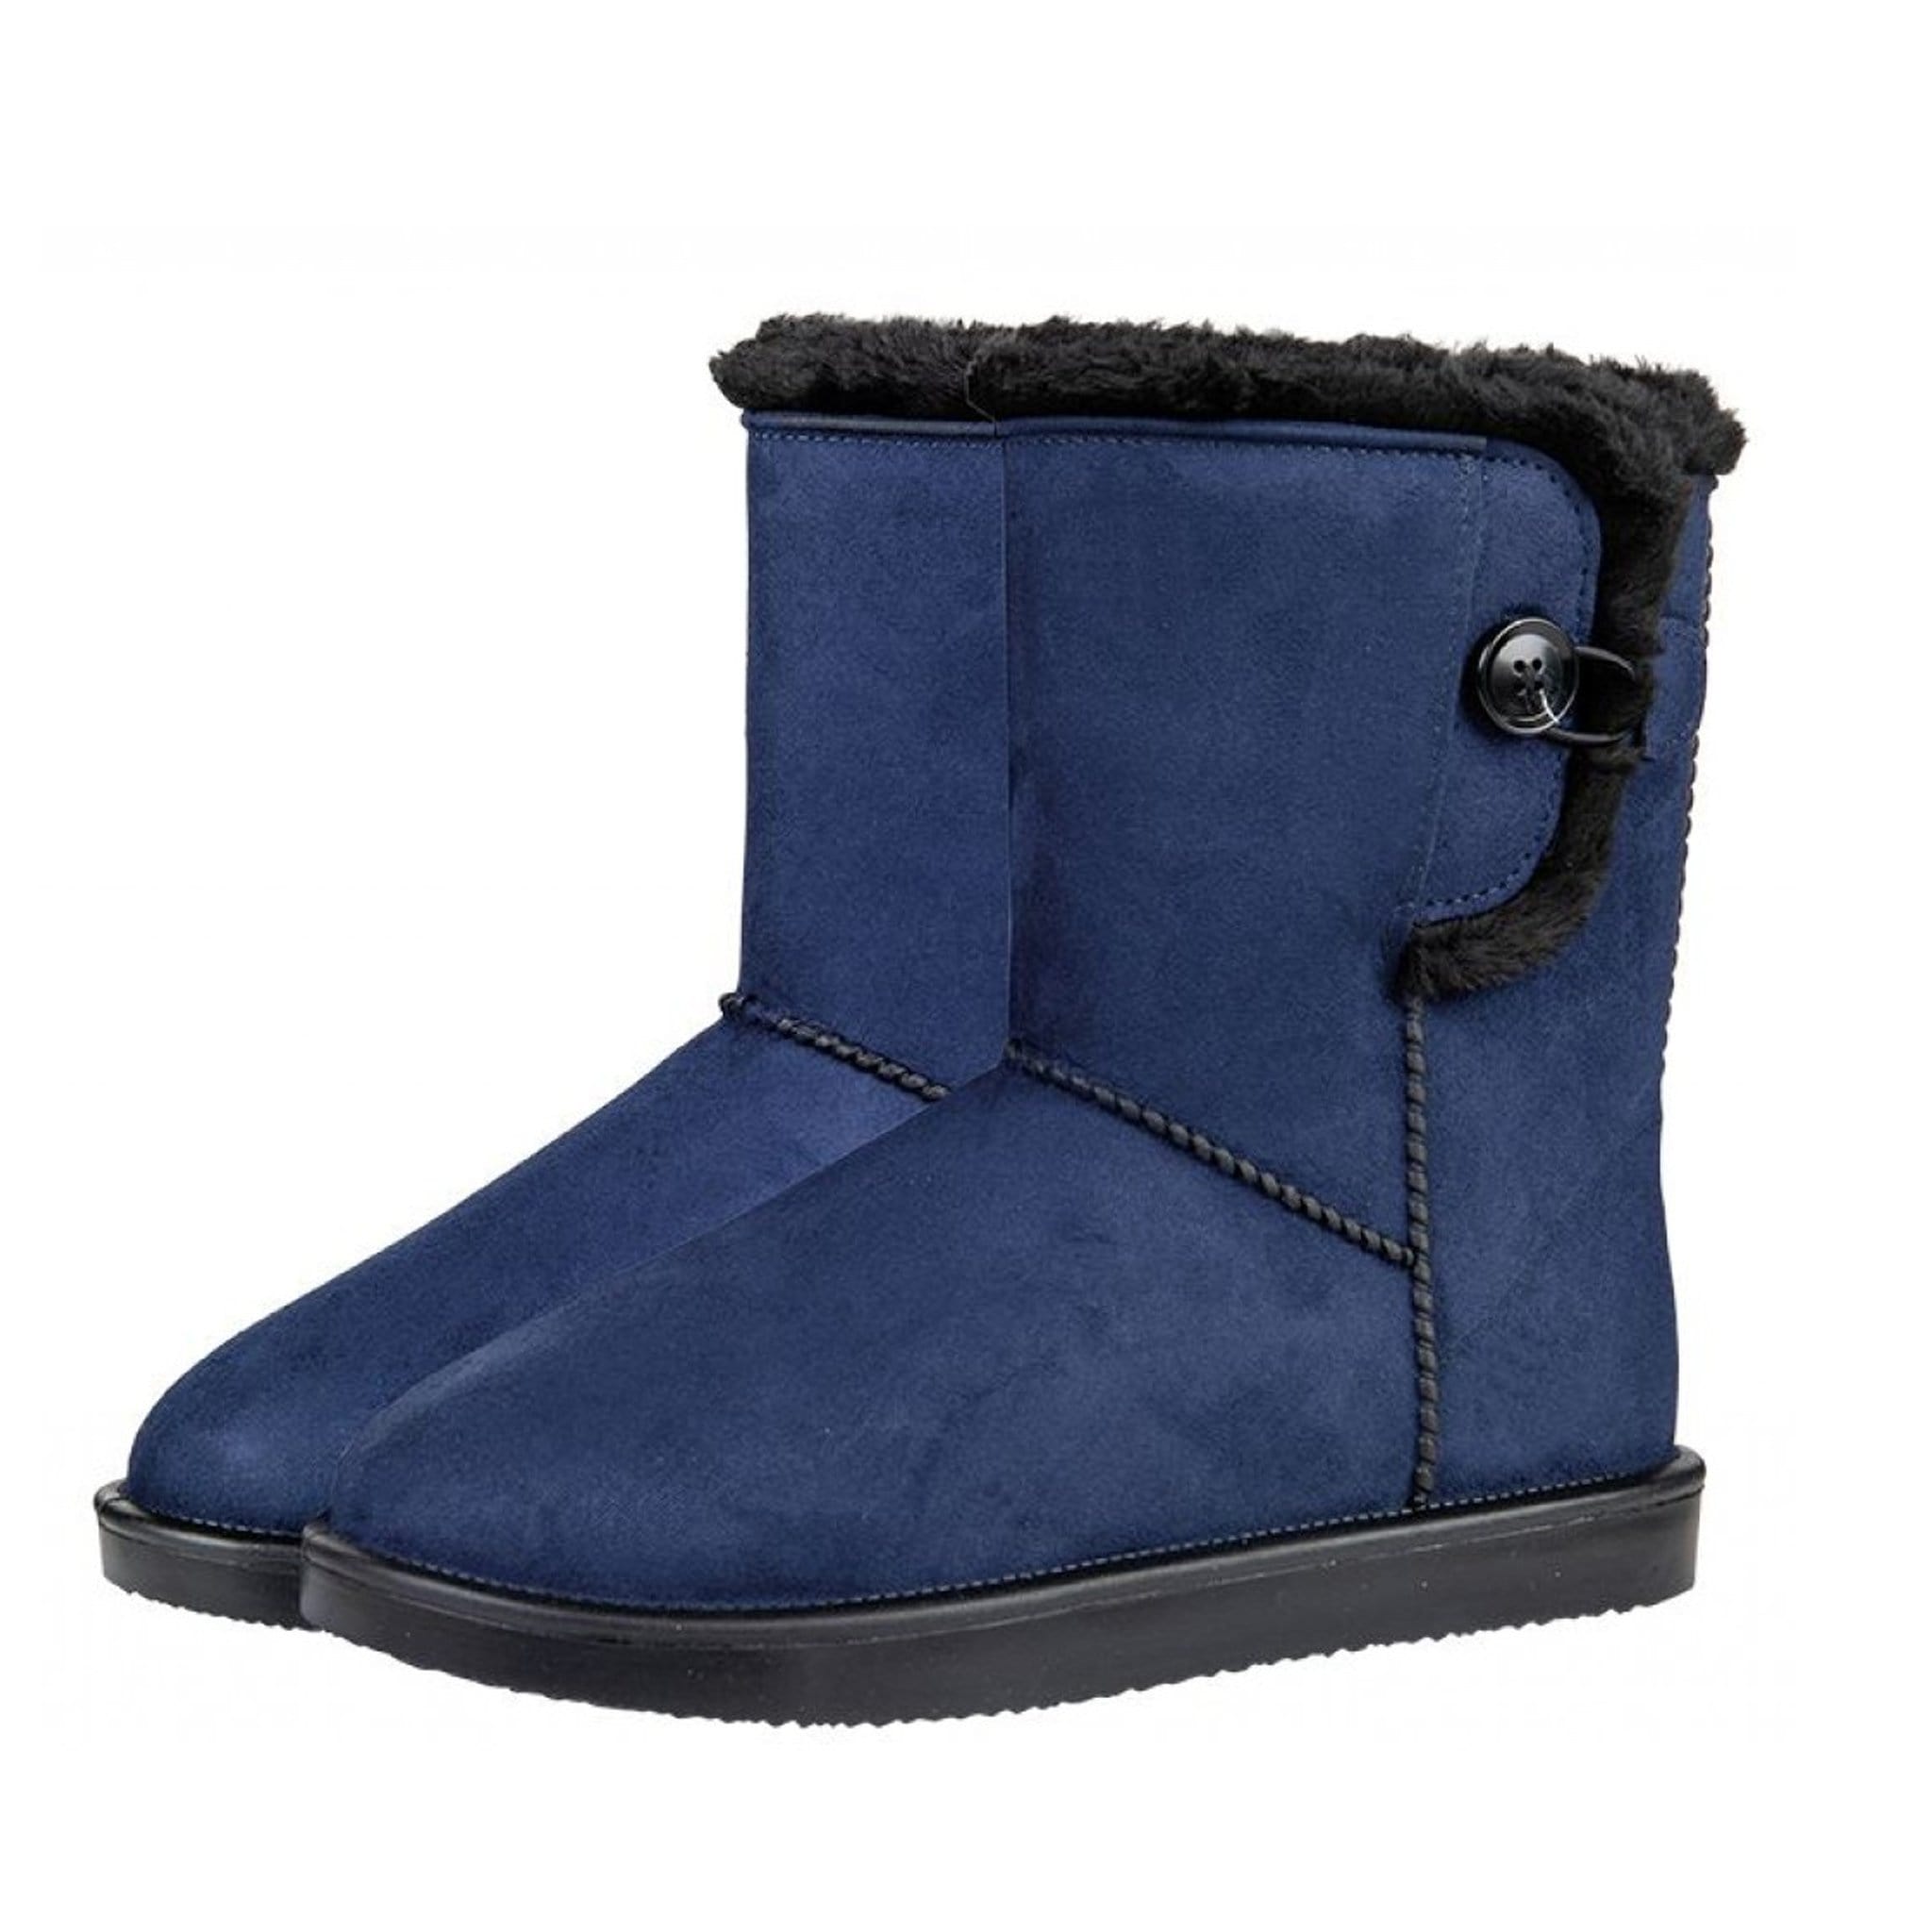 HKM Davos All Weather Fur Boots Deep BLue 12563